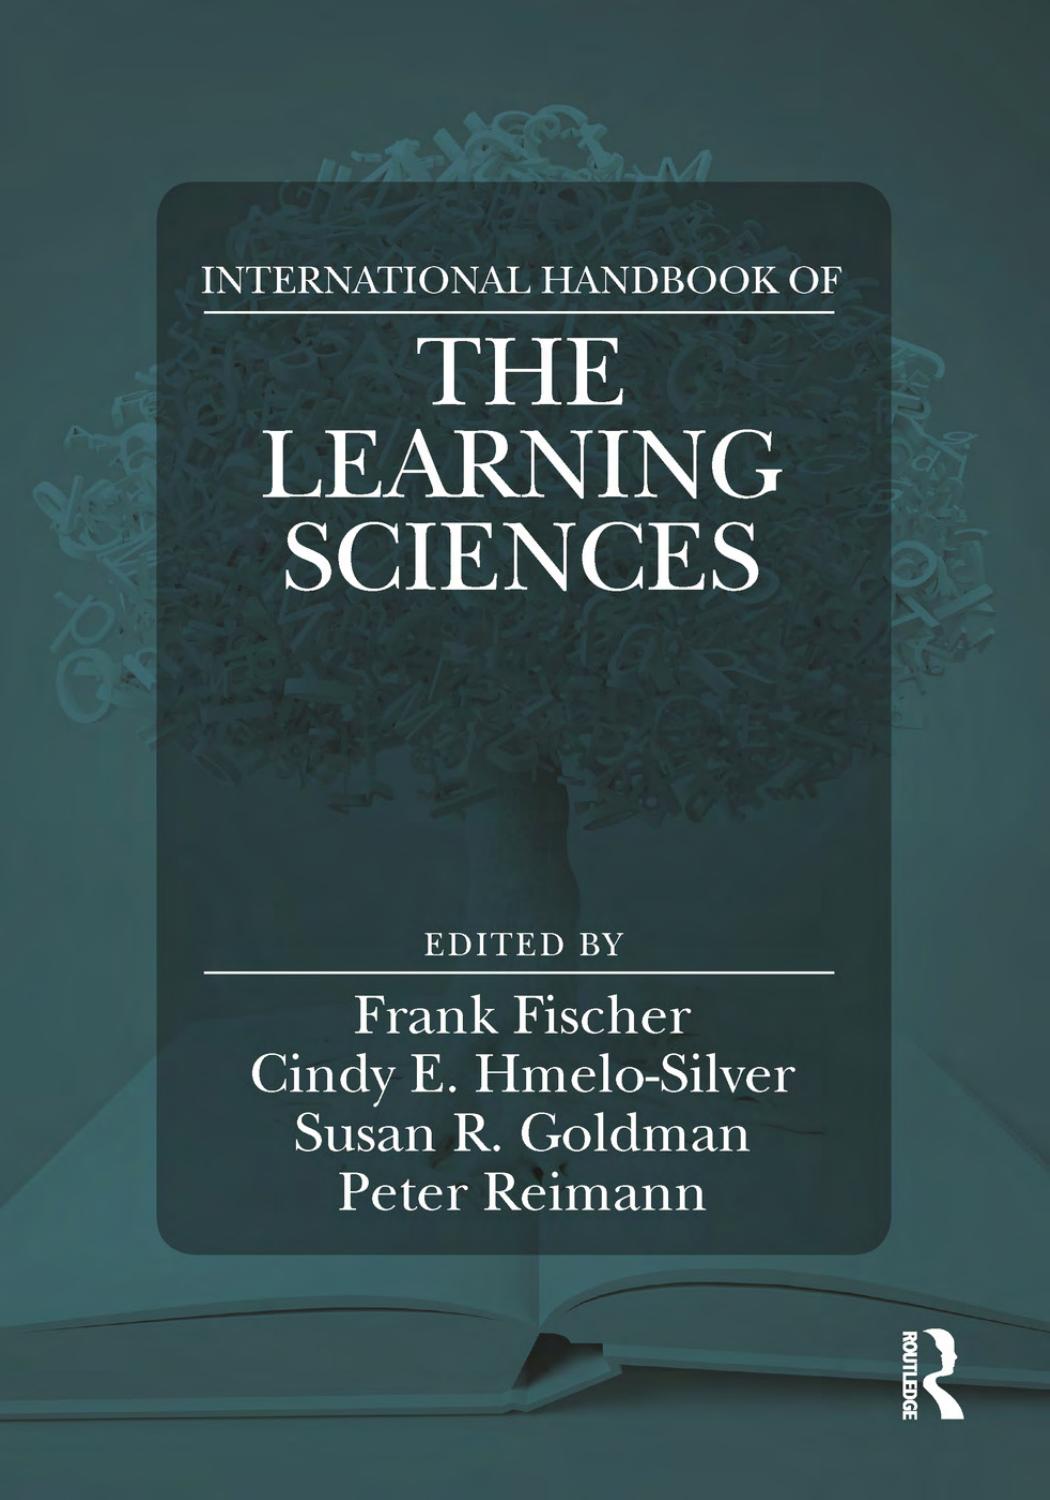 International Handbook of the Learning Sciences 1st Edition by  Cindy E. Hmelo-Silver , Susan R. Goldman